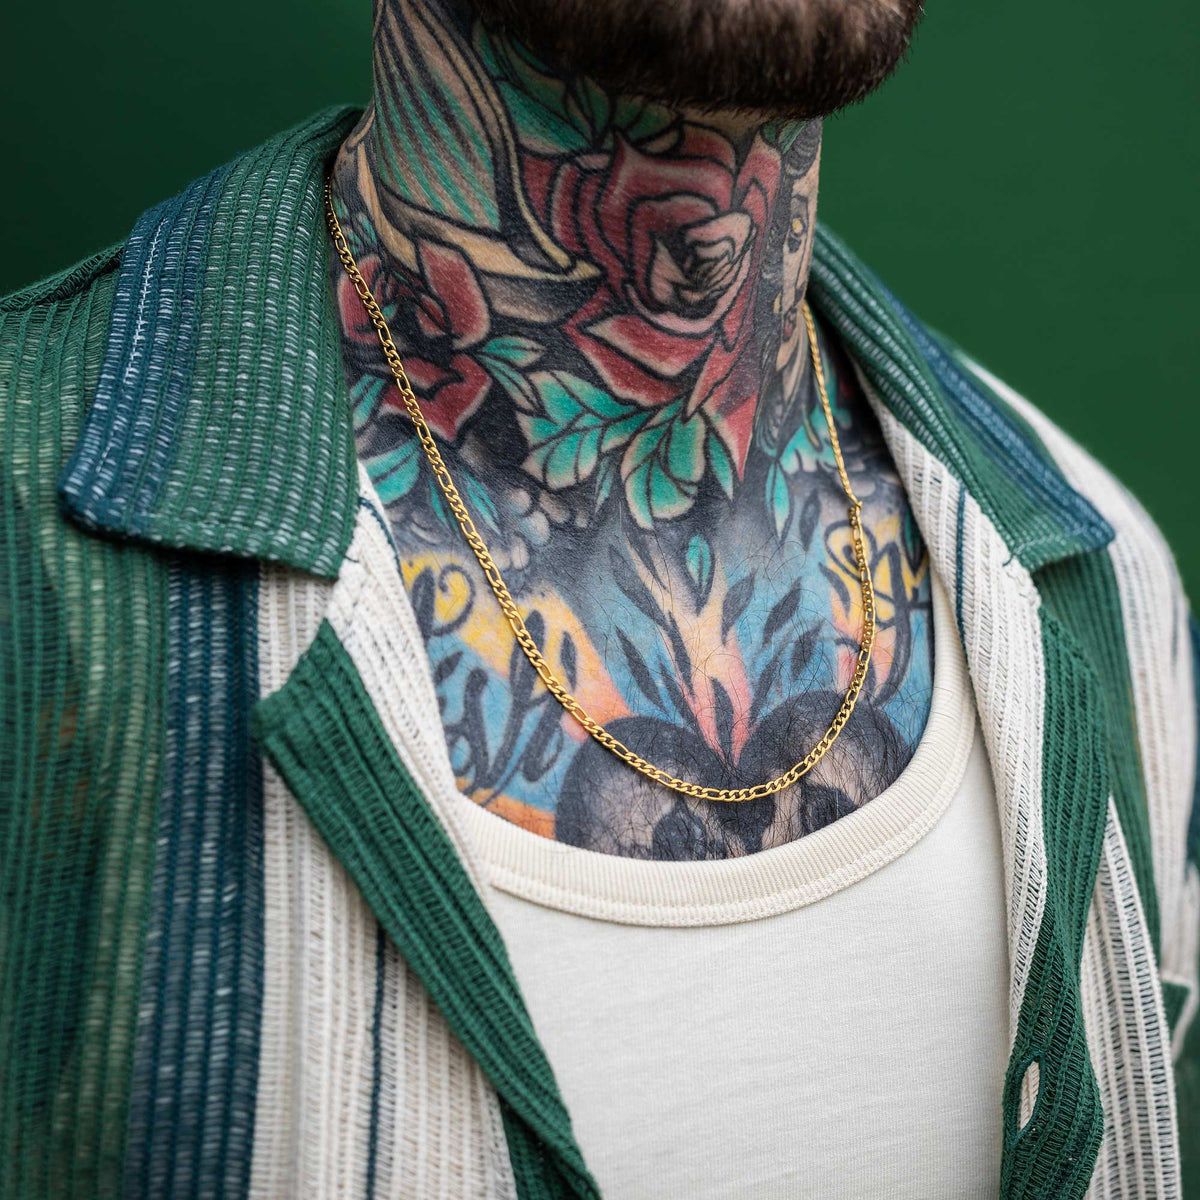 Long gold figaro chain on male model with tattoos